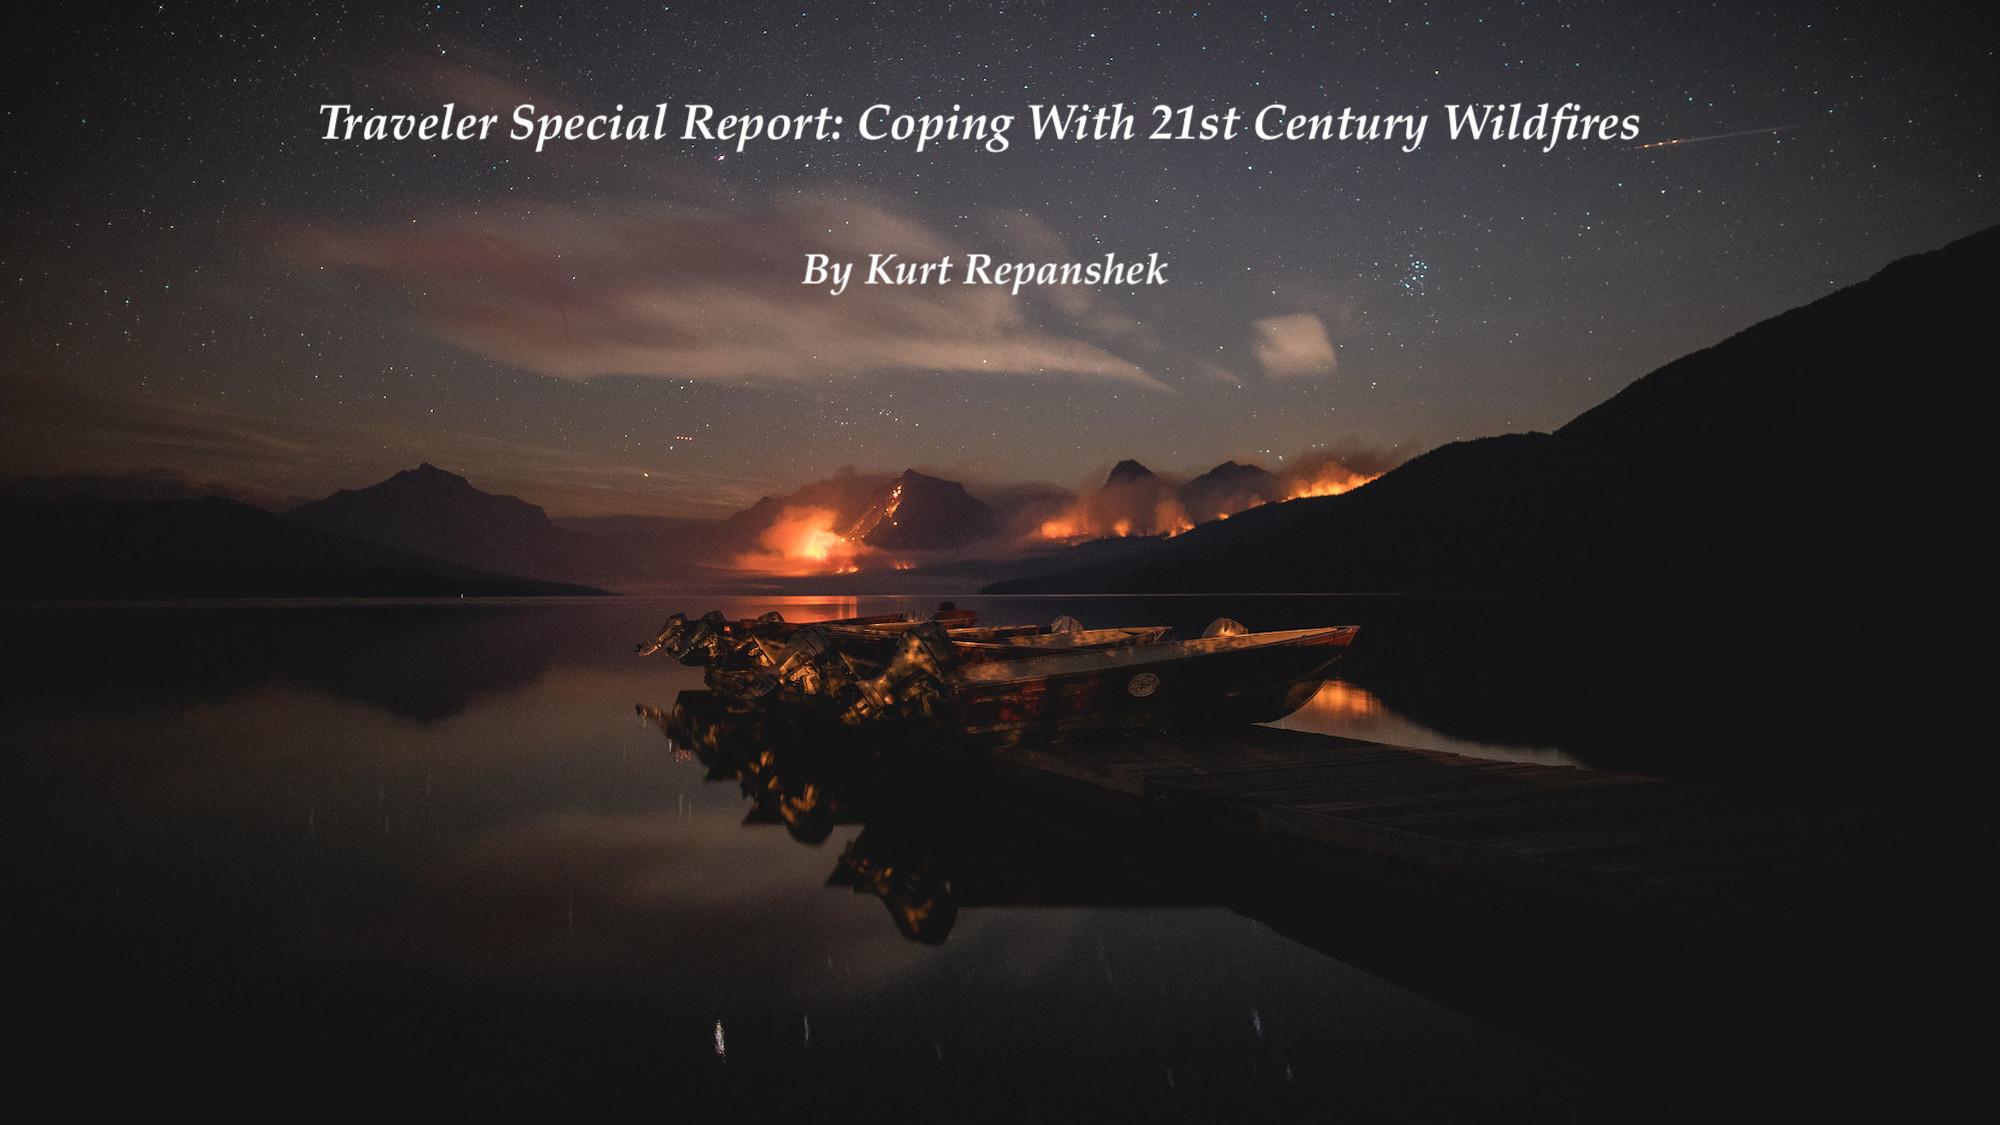 Traveler Special Report: Coping With 21st Century Wildfires